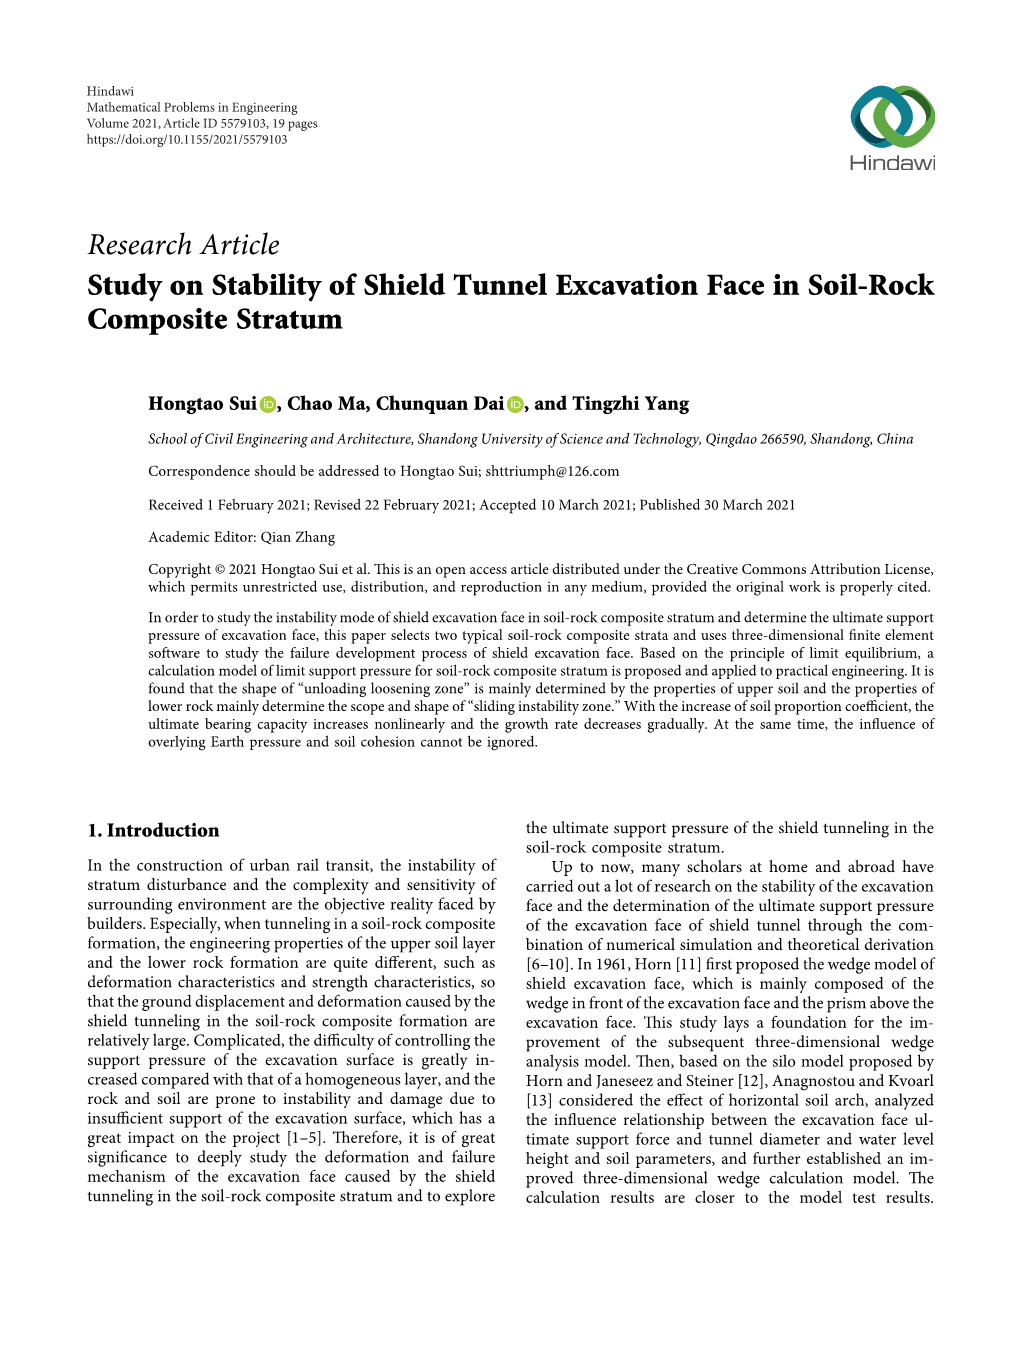 Study on Stability of Shield Tunnel Excavation Face in Soil-Rock Composite Stratum